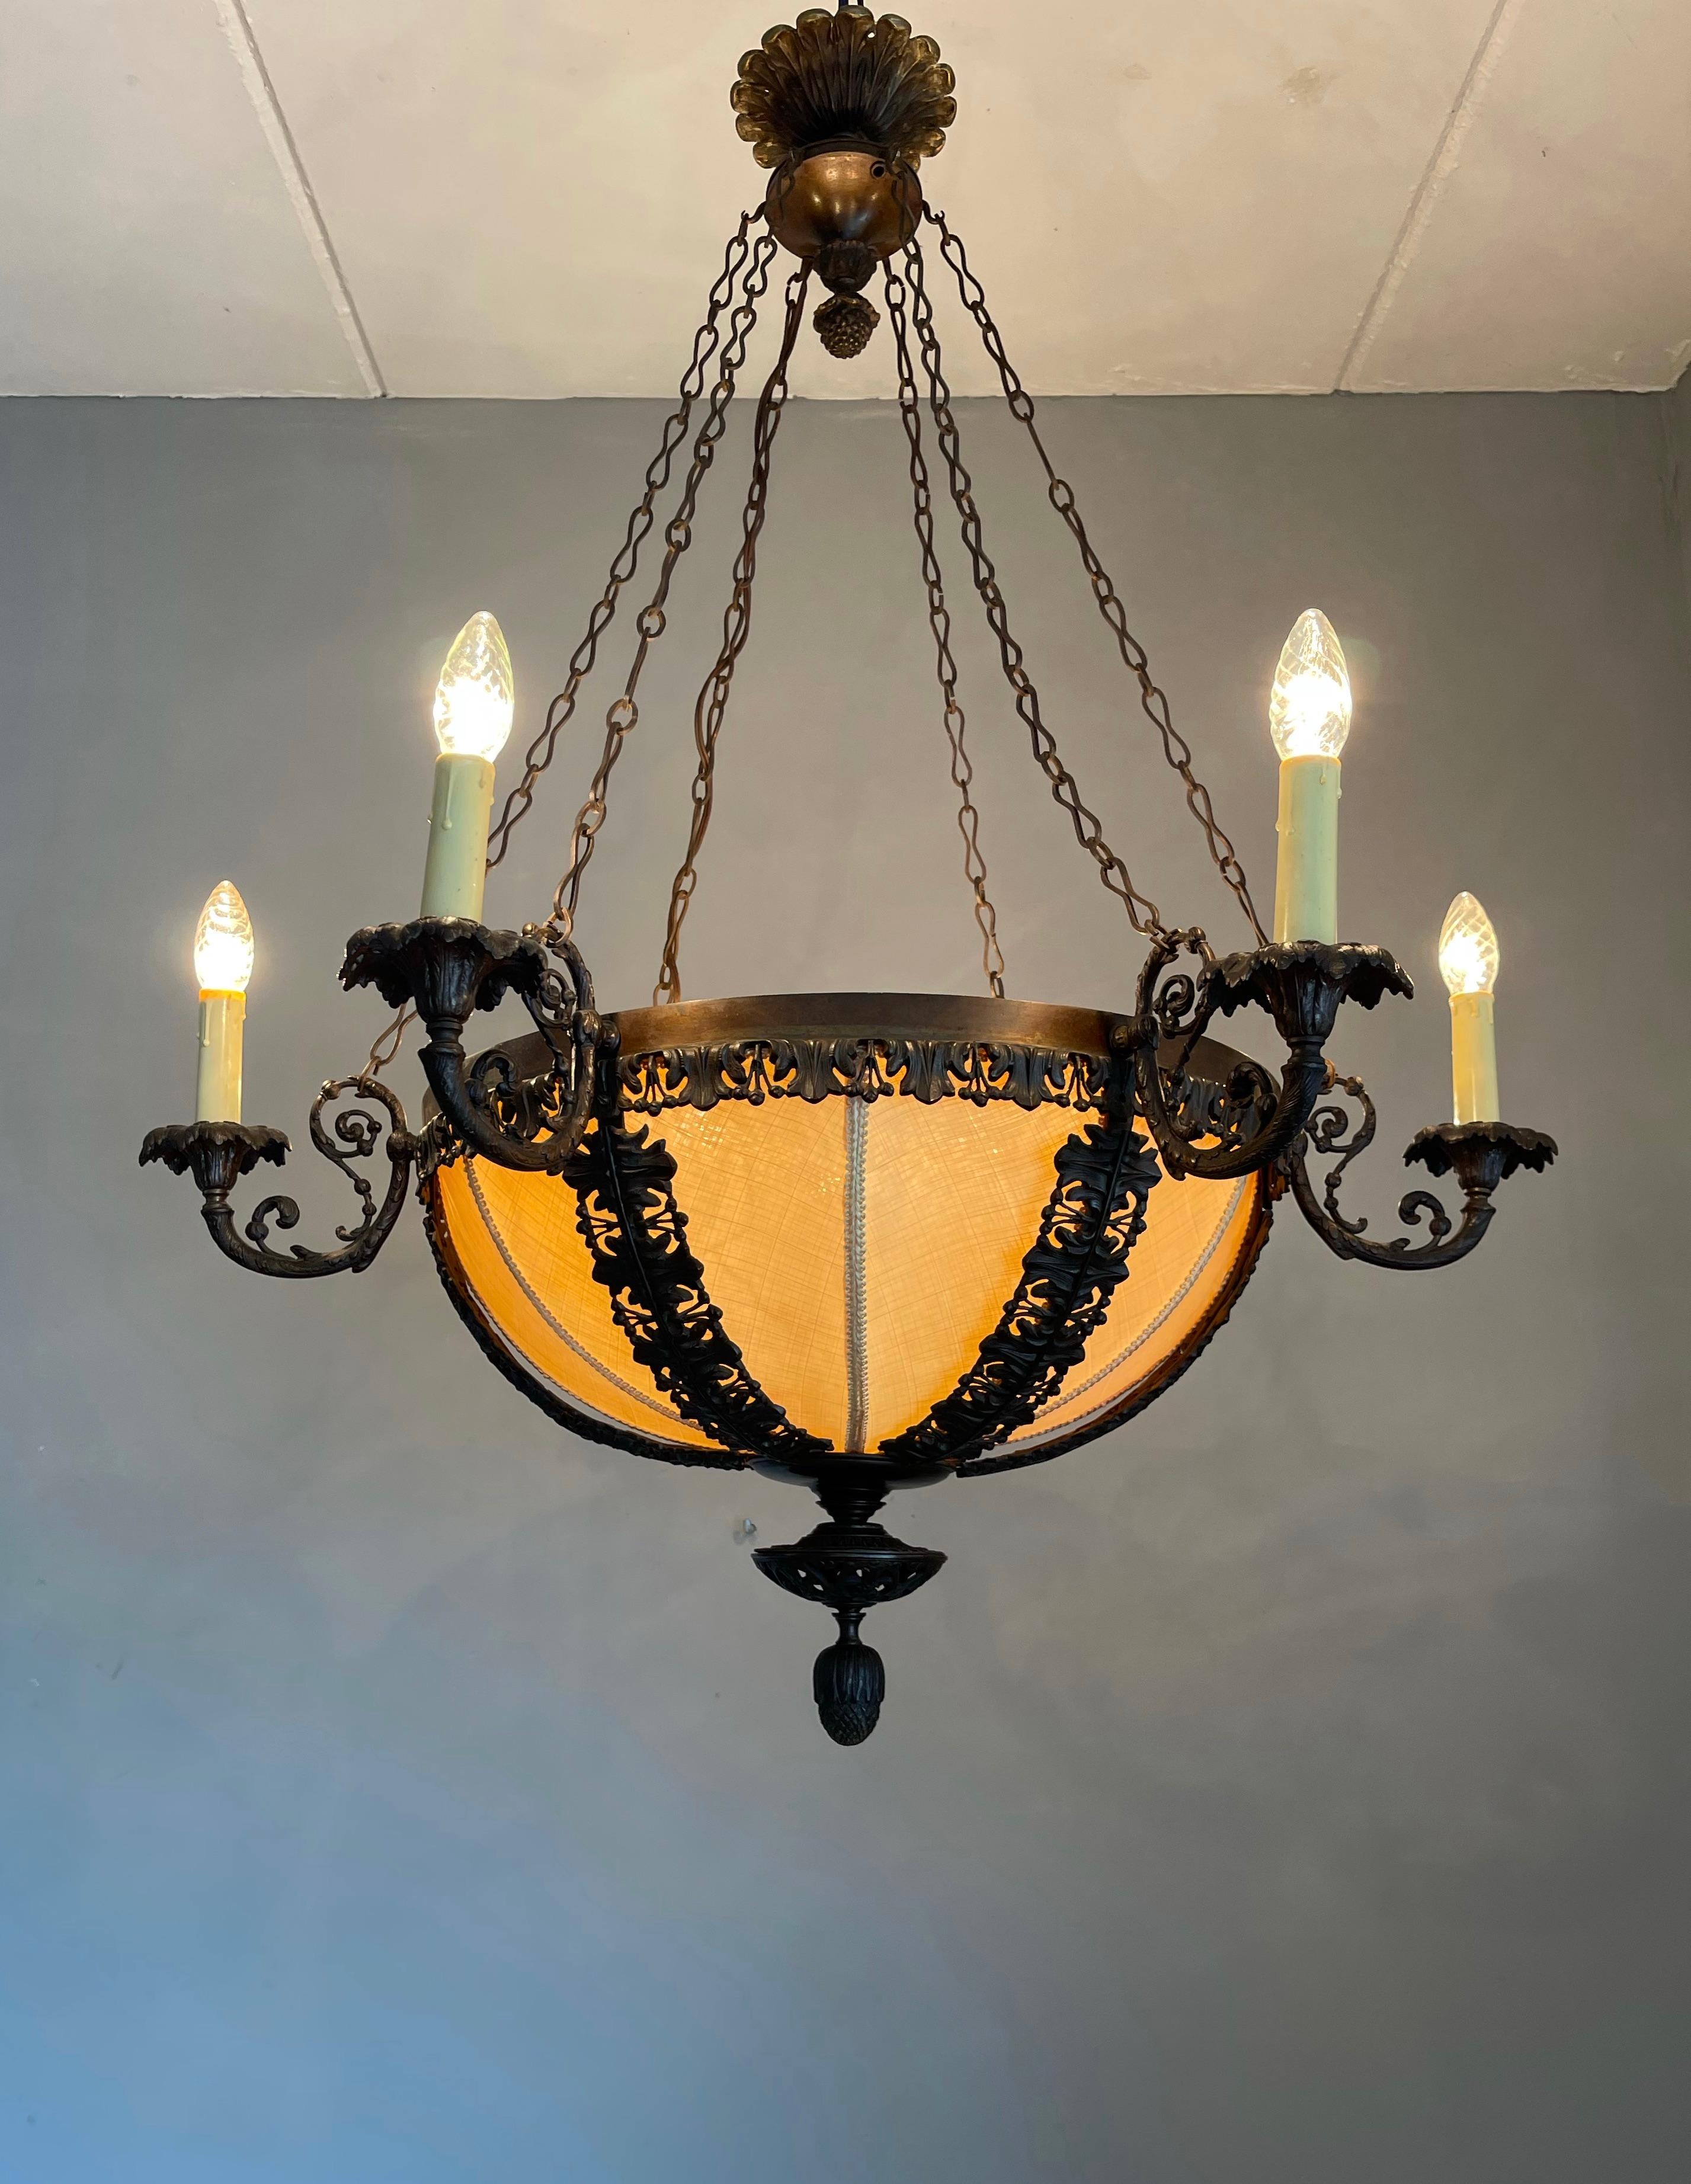 Top quality workmanship antique light fixture.

The 1stdibs platform is known for offering the most beautiful things on earth and this remarkable and stately work of lighting art from the earliest years of the 20th century undoubtedly fits that